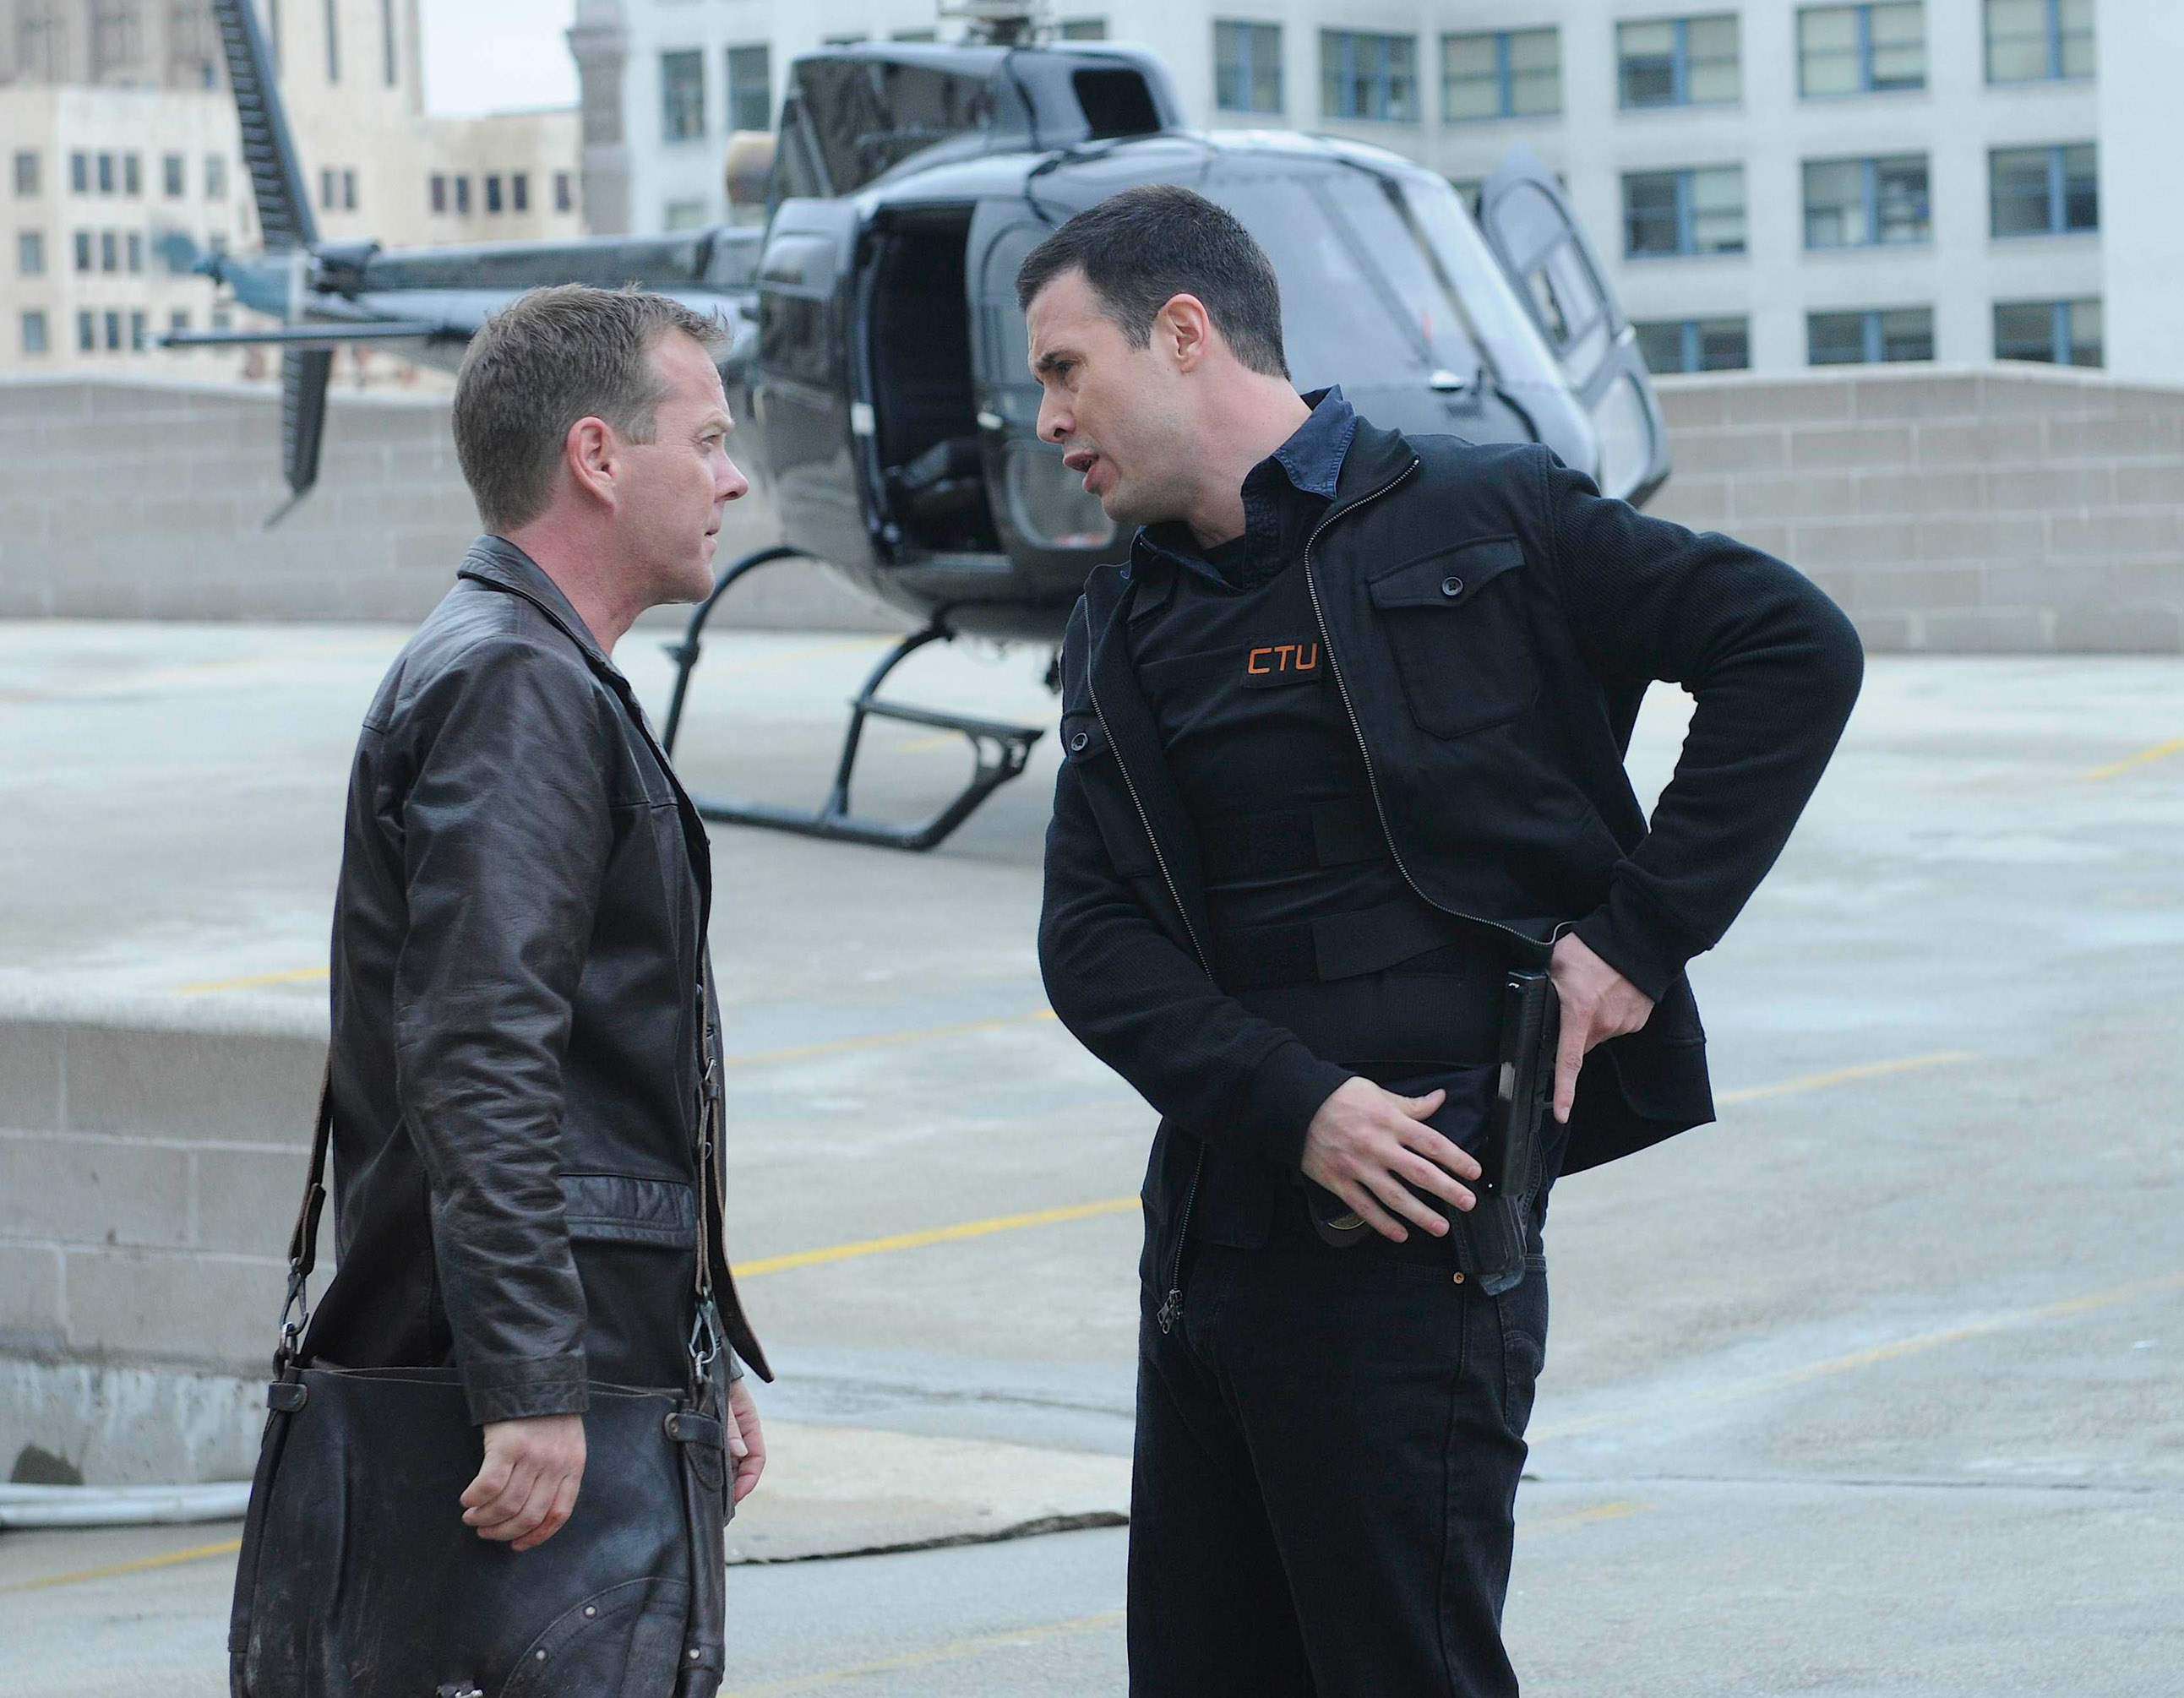 Kiefer and Freddie in a tense scene on a rooftop with a helicopter in the background